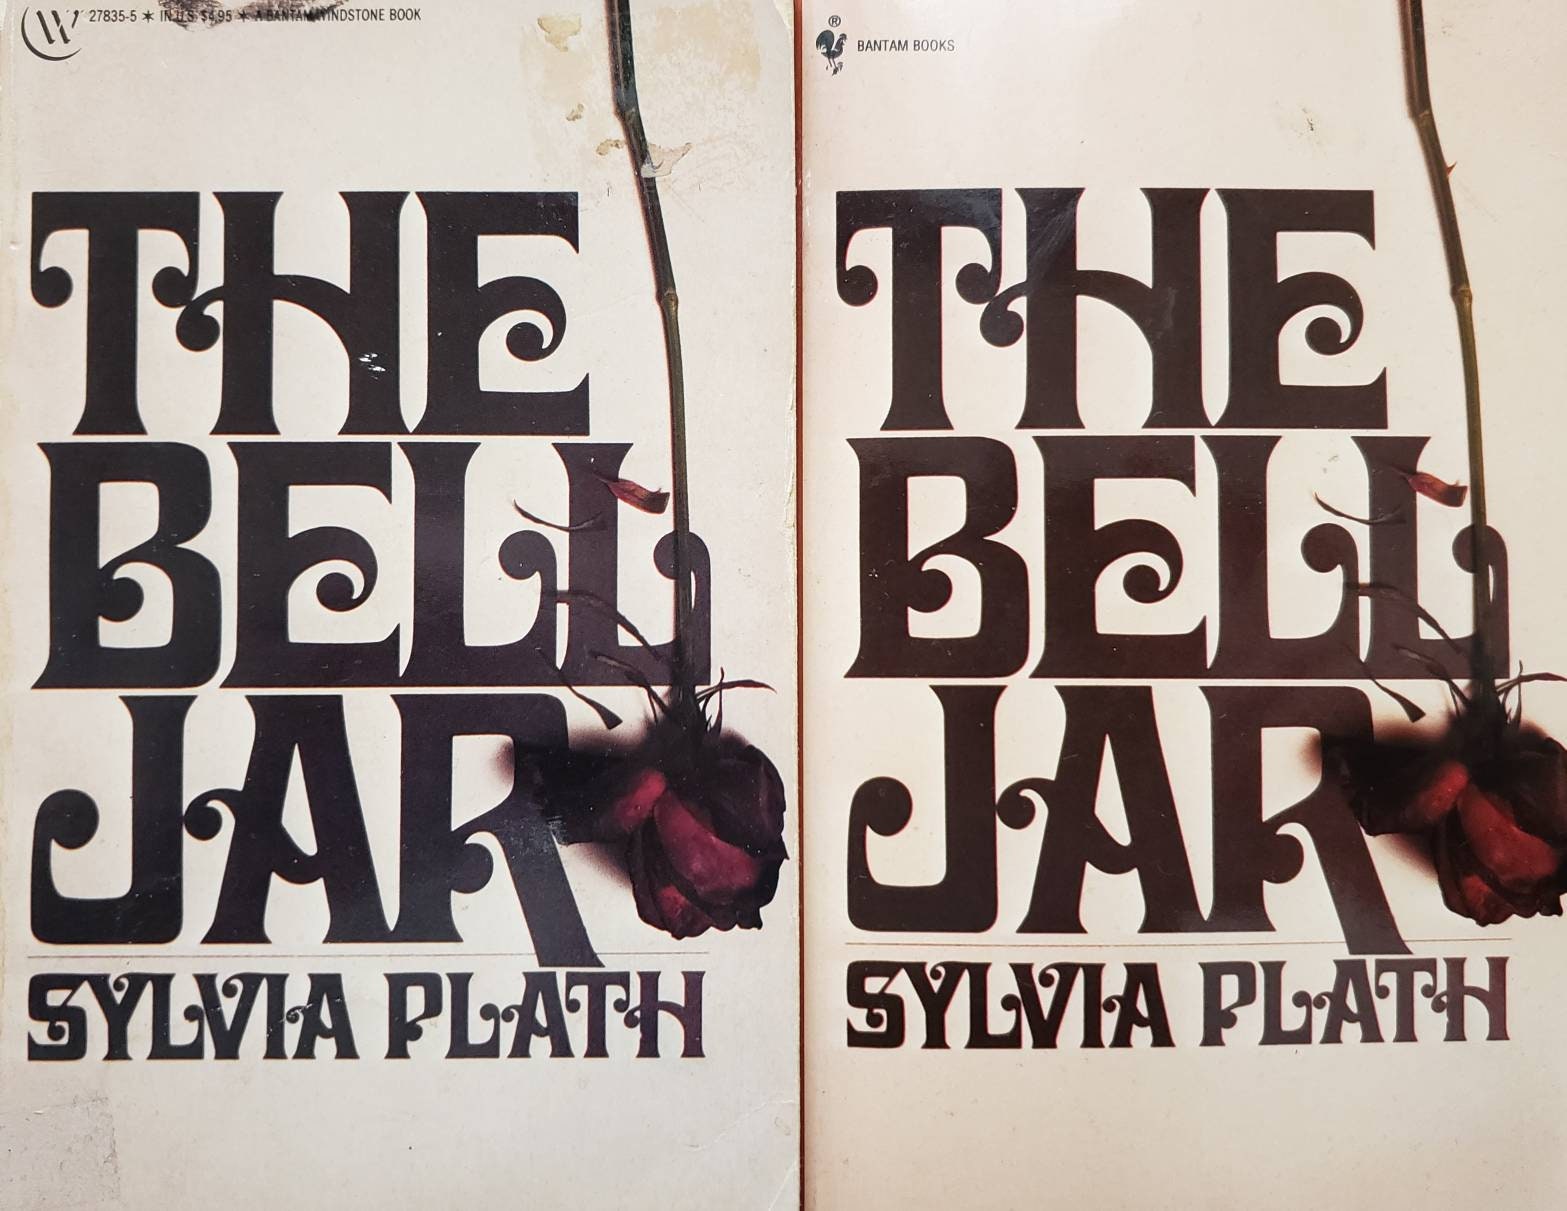 The Bell Jar by Sylvia Plath Print on an Antique Page, Book Cover Art,  Bookish Gifts 